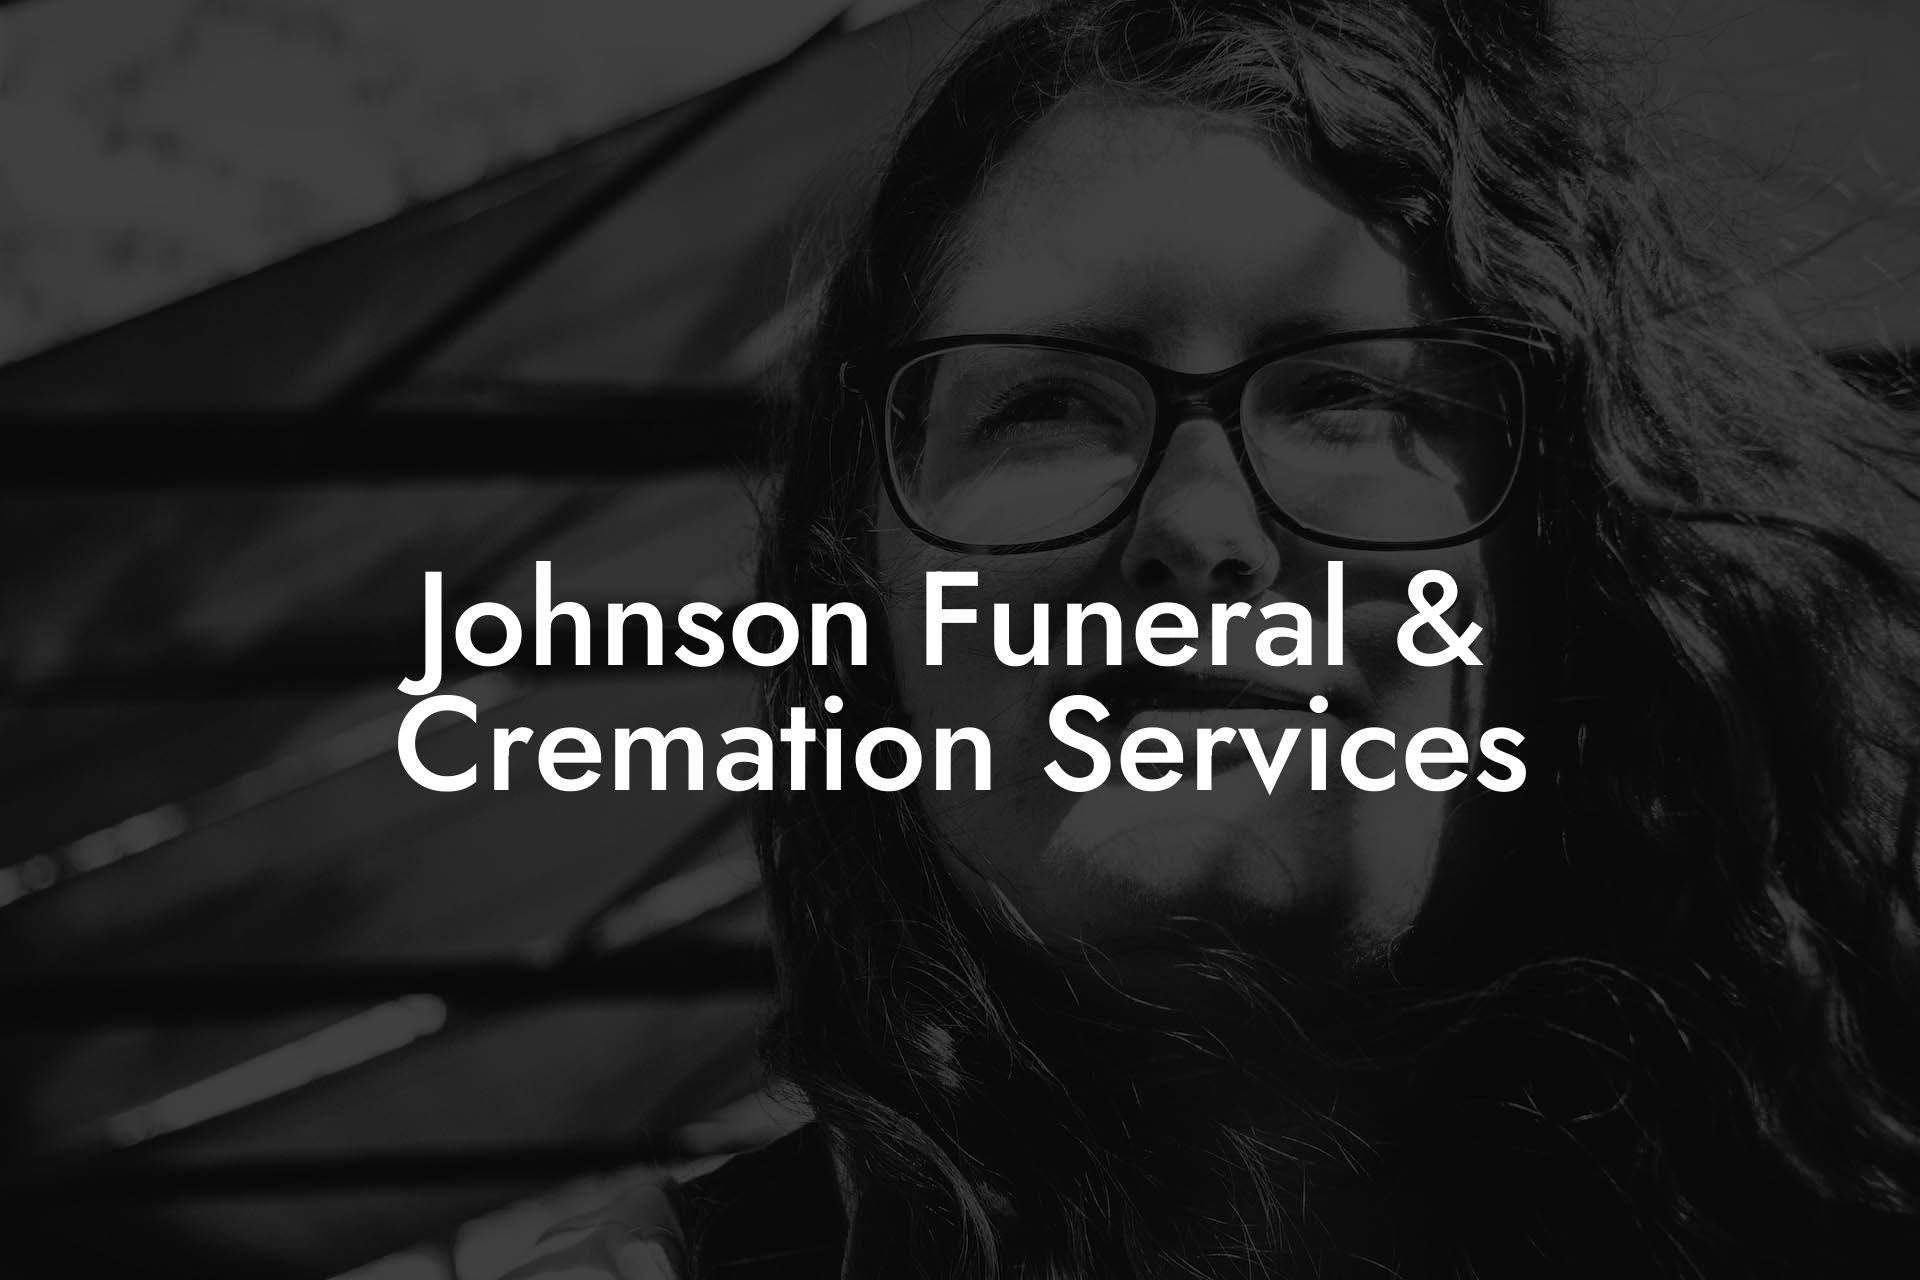 Johnson Funeral & Cremation Services